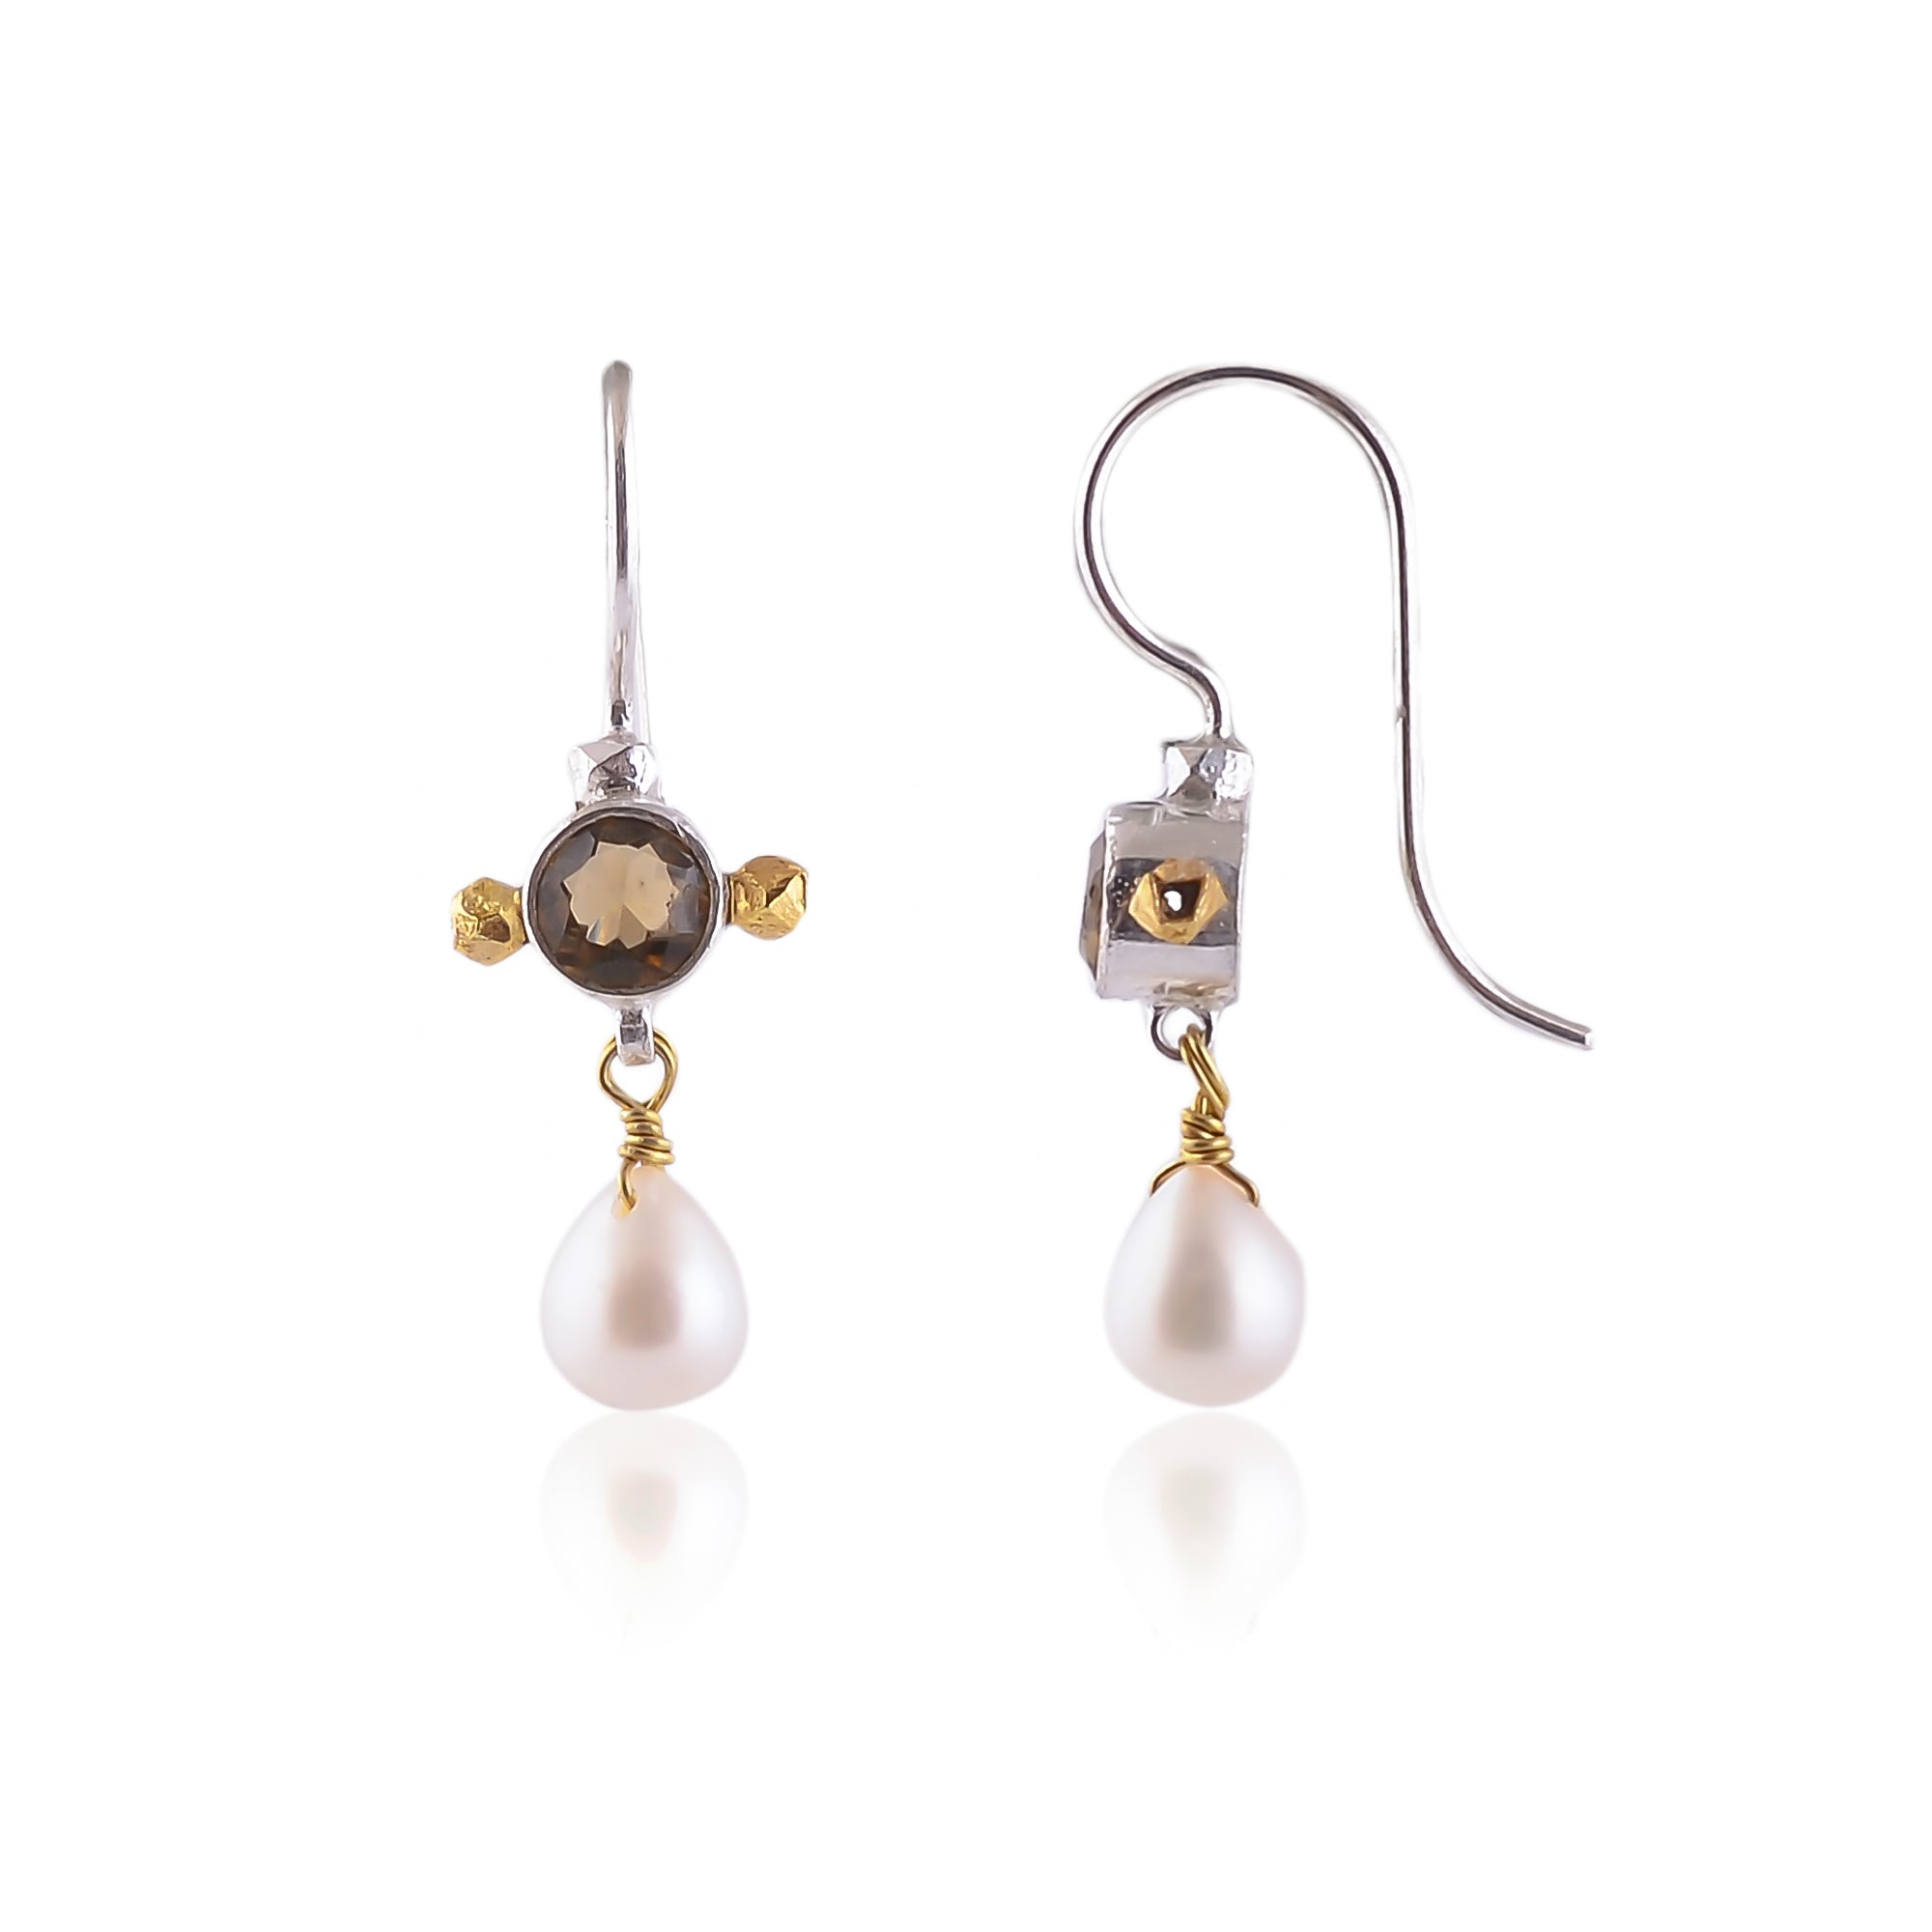 Buy Handmade Silver Citrine With Pearl Drop Earring